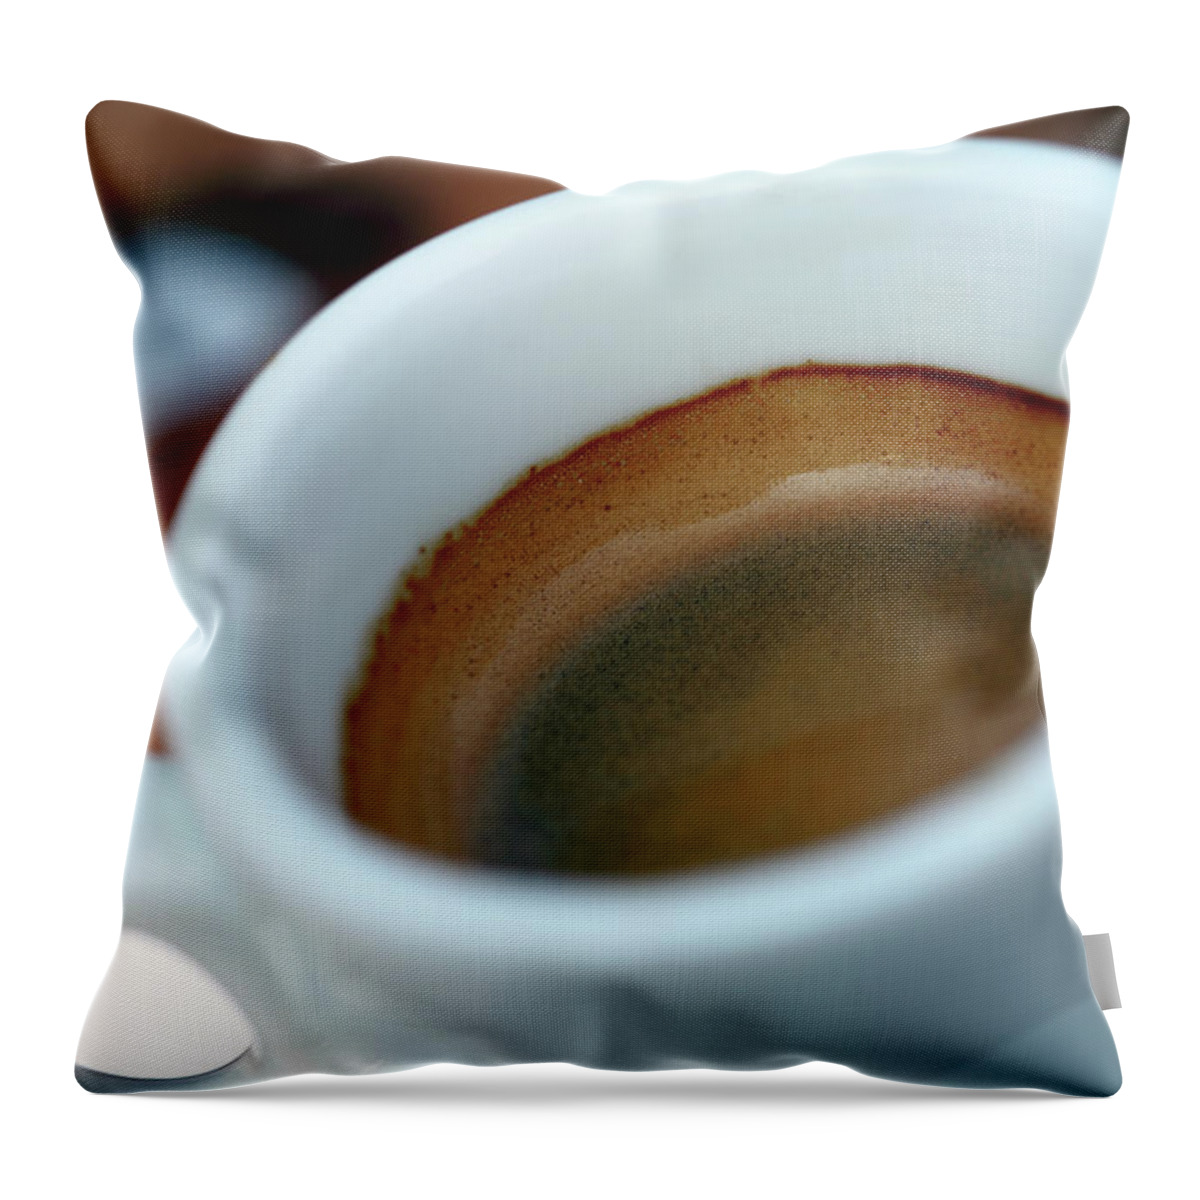 Breakfast Throw Pillow featuring the photograph Cup Of Black Coffee by Laurent